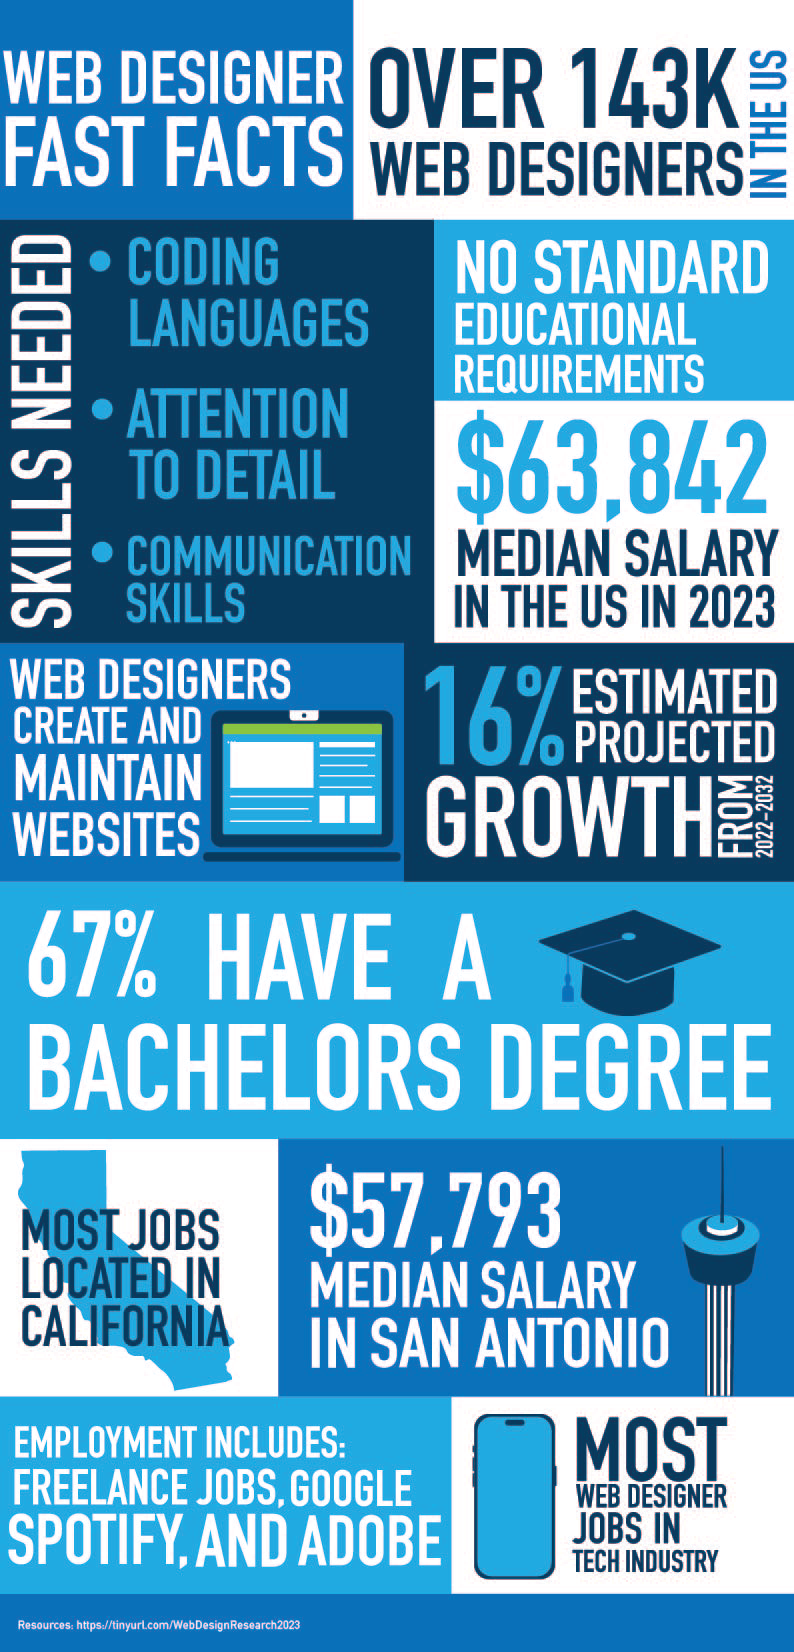 Details about Web and Branding Jobs and Career Paths.